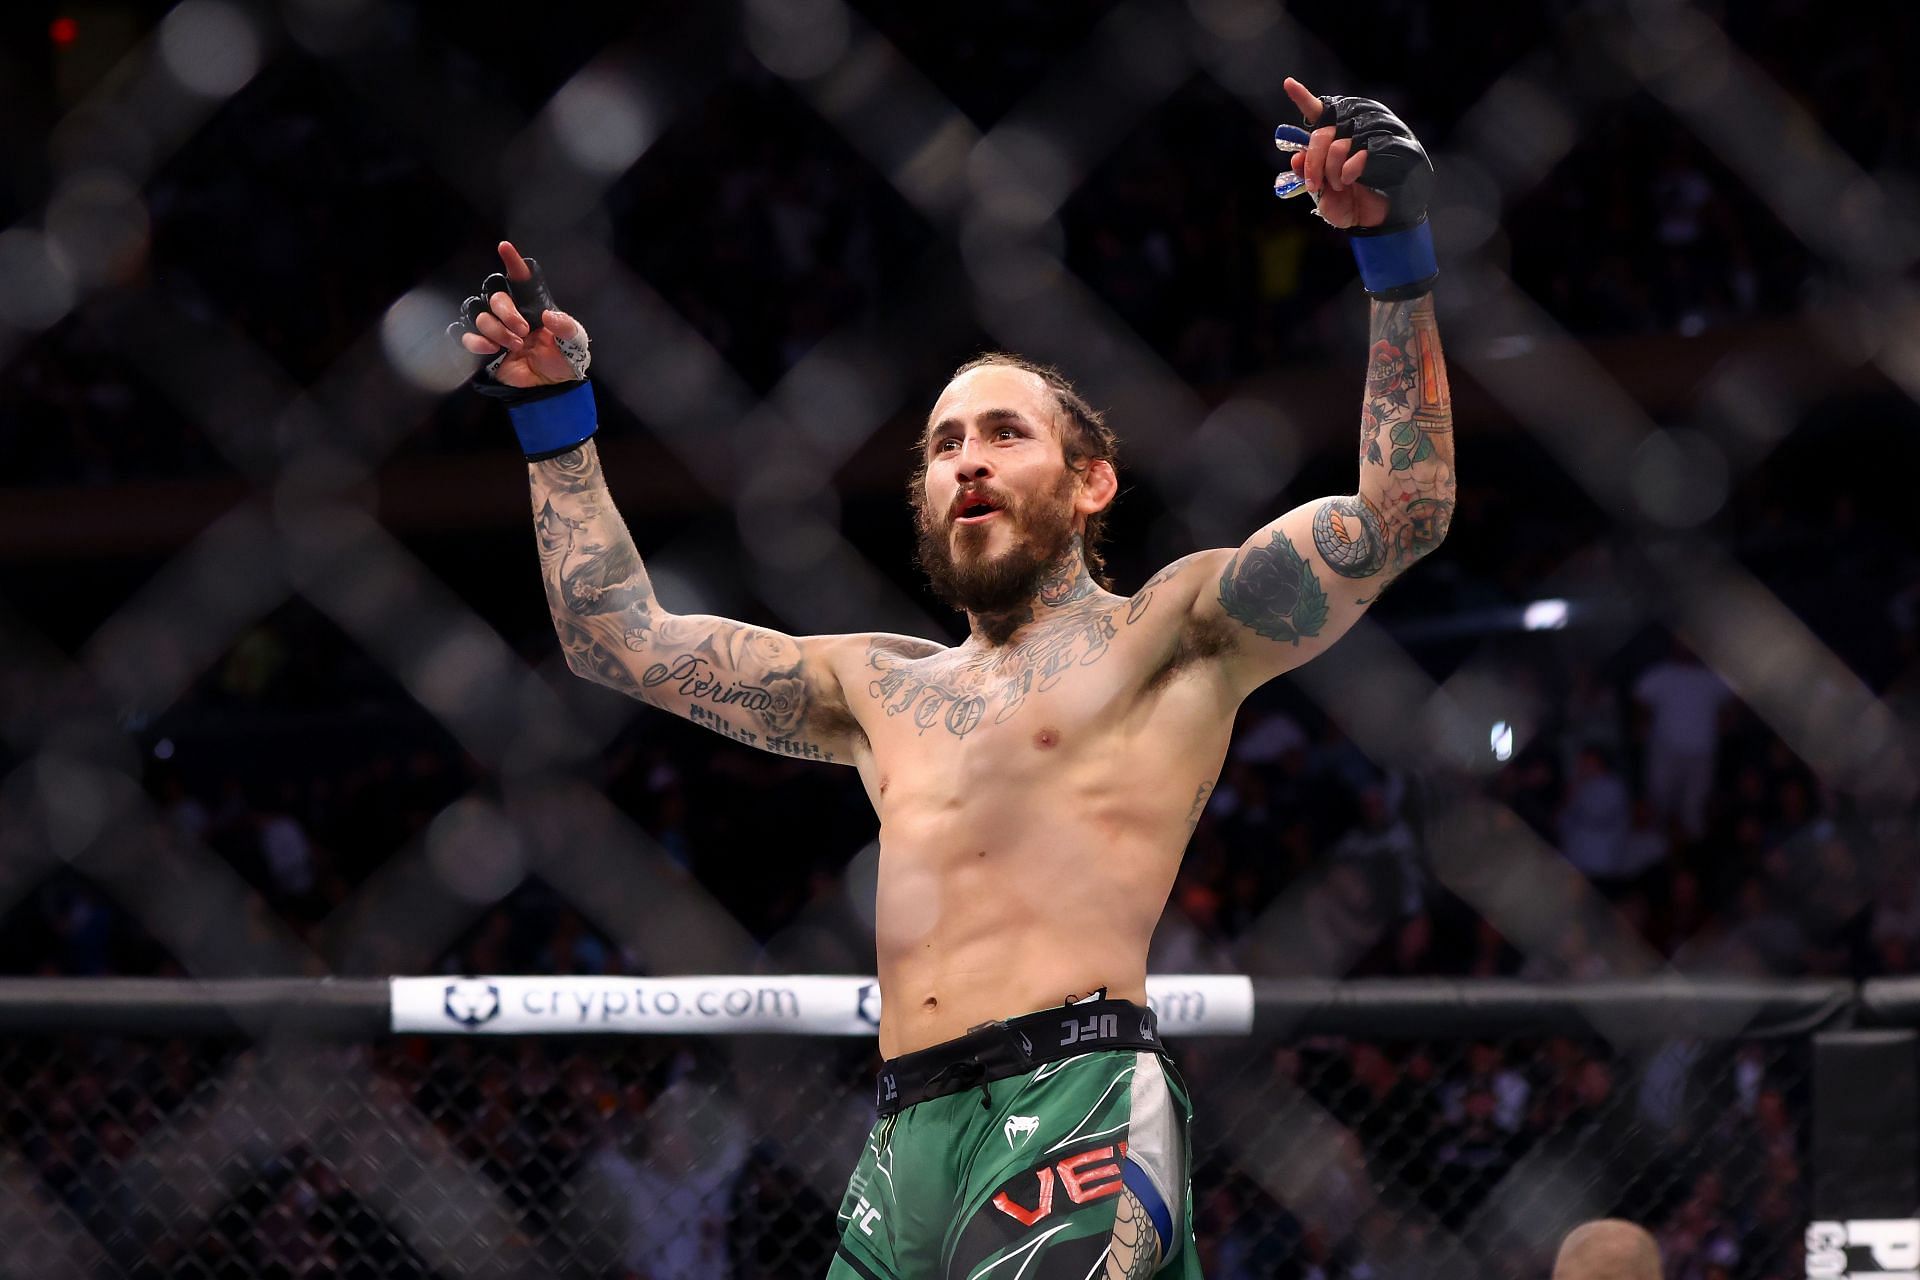 Marlon Vera is one of the most exciting and dangerous bantamweights in the UFC